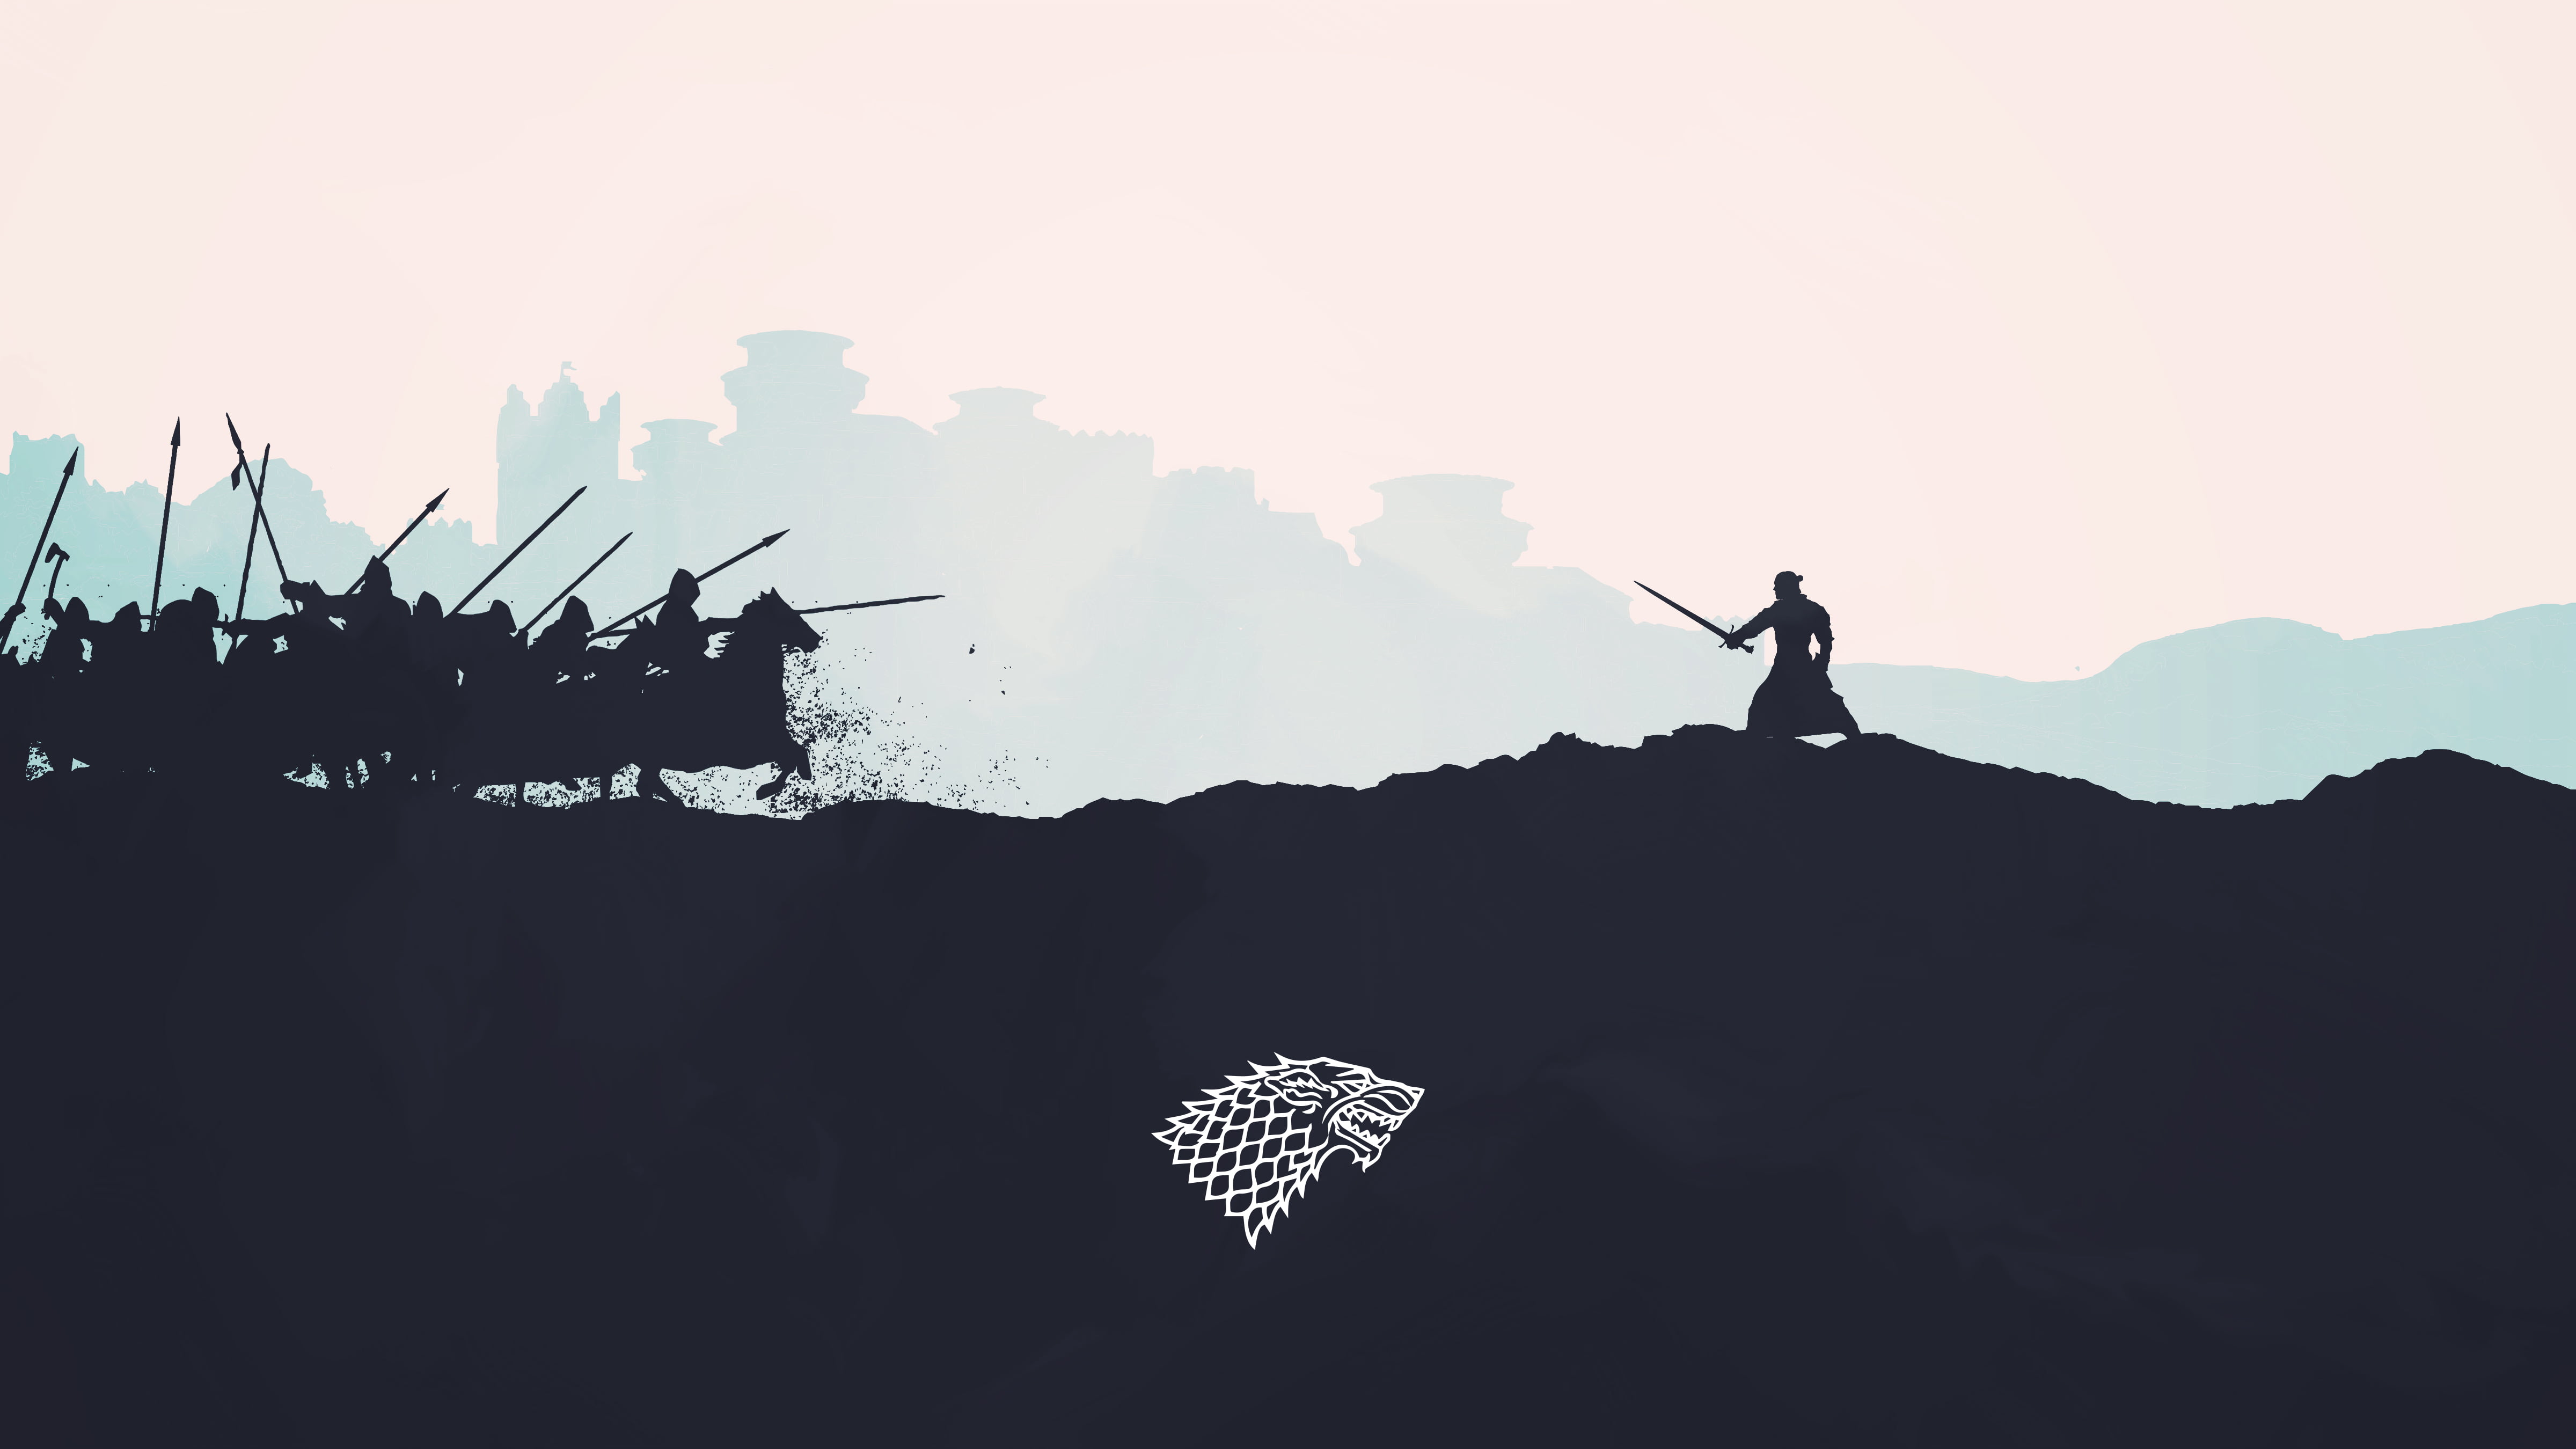 silhouette of character holding sword illustration, Game of Thrones